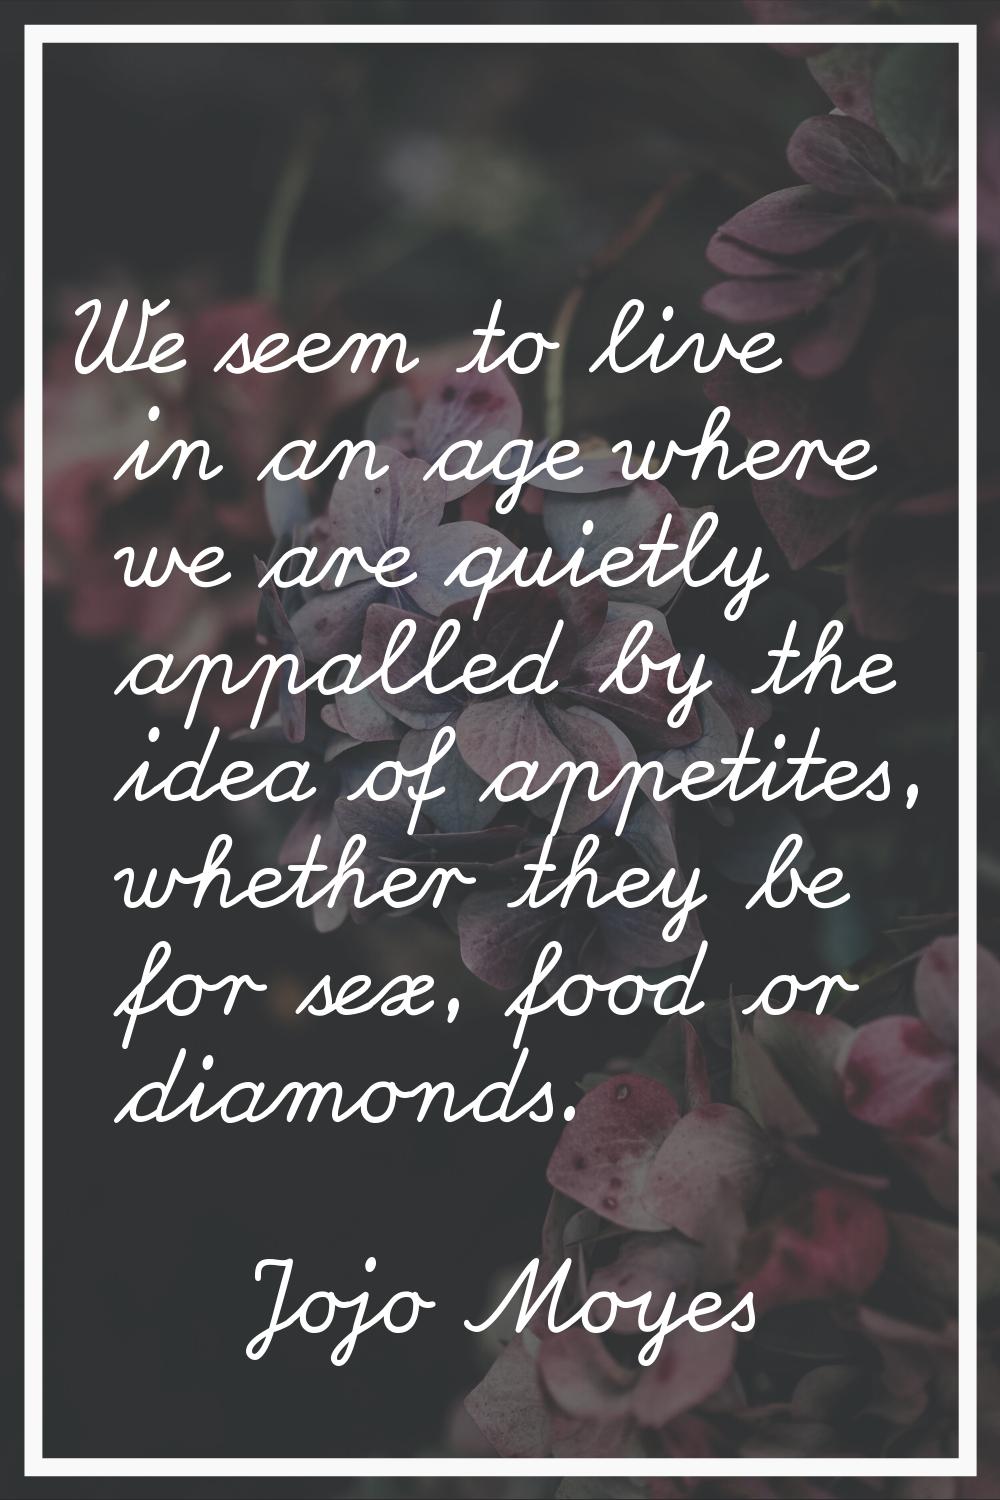 We seem to live in an age where we are quietly appalled by the idea of appetites, whether they be f